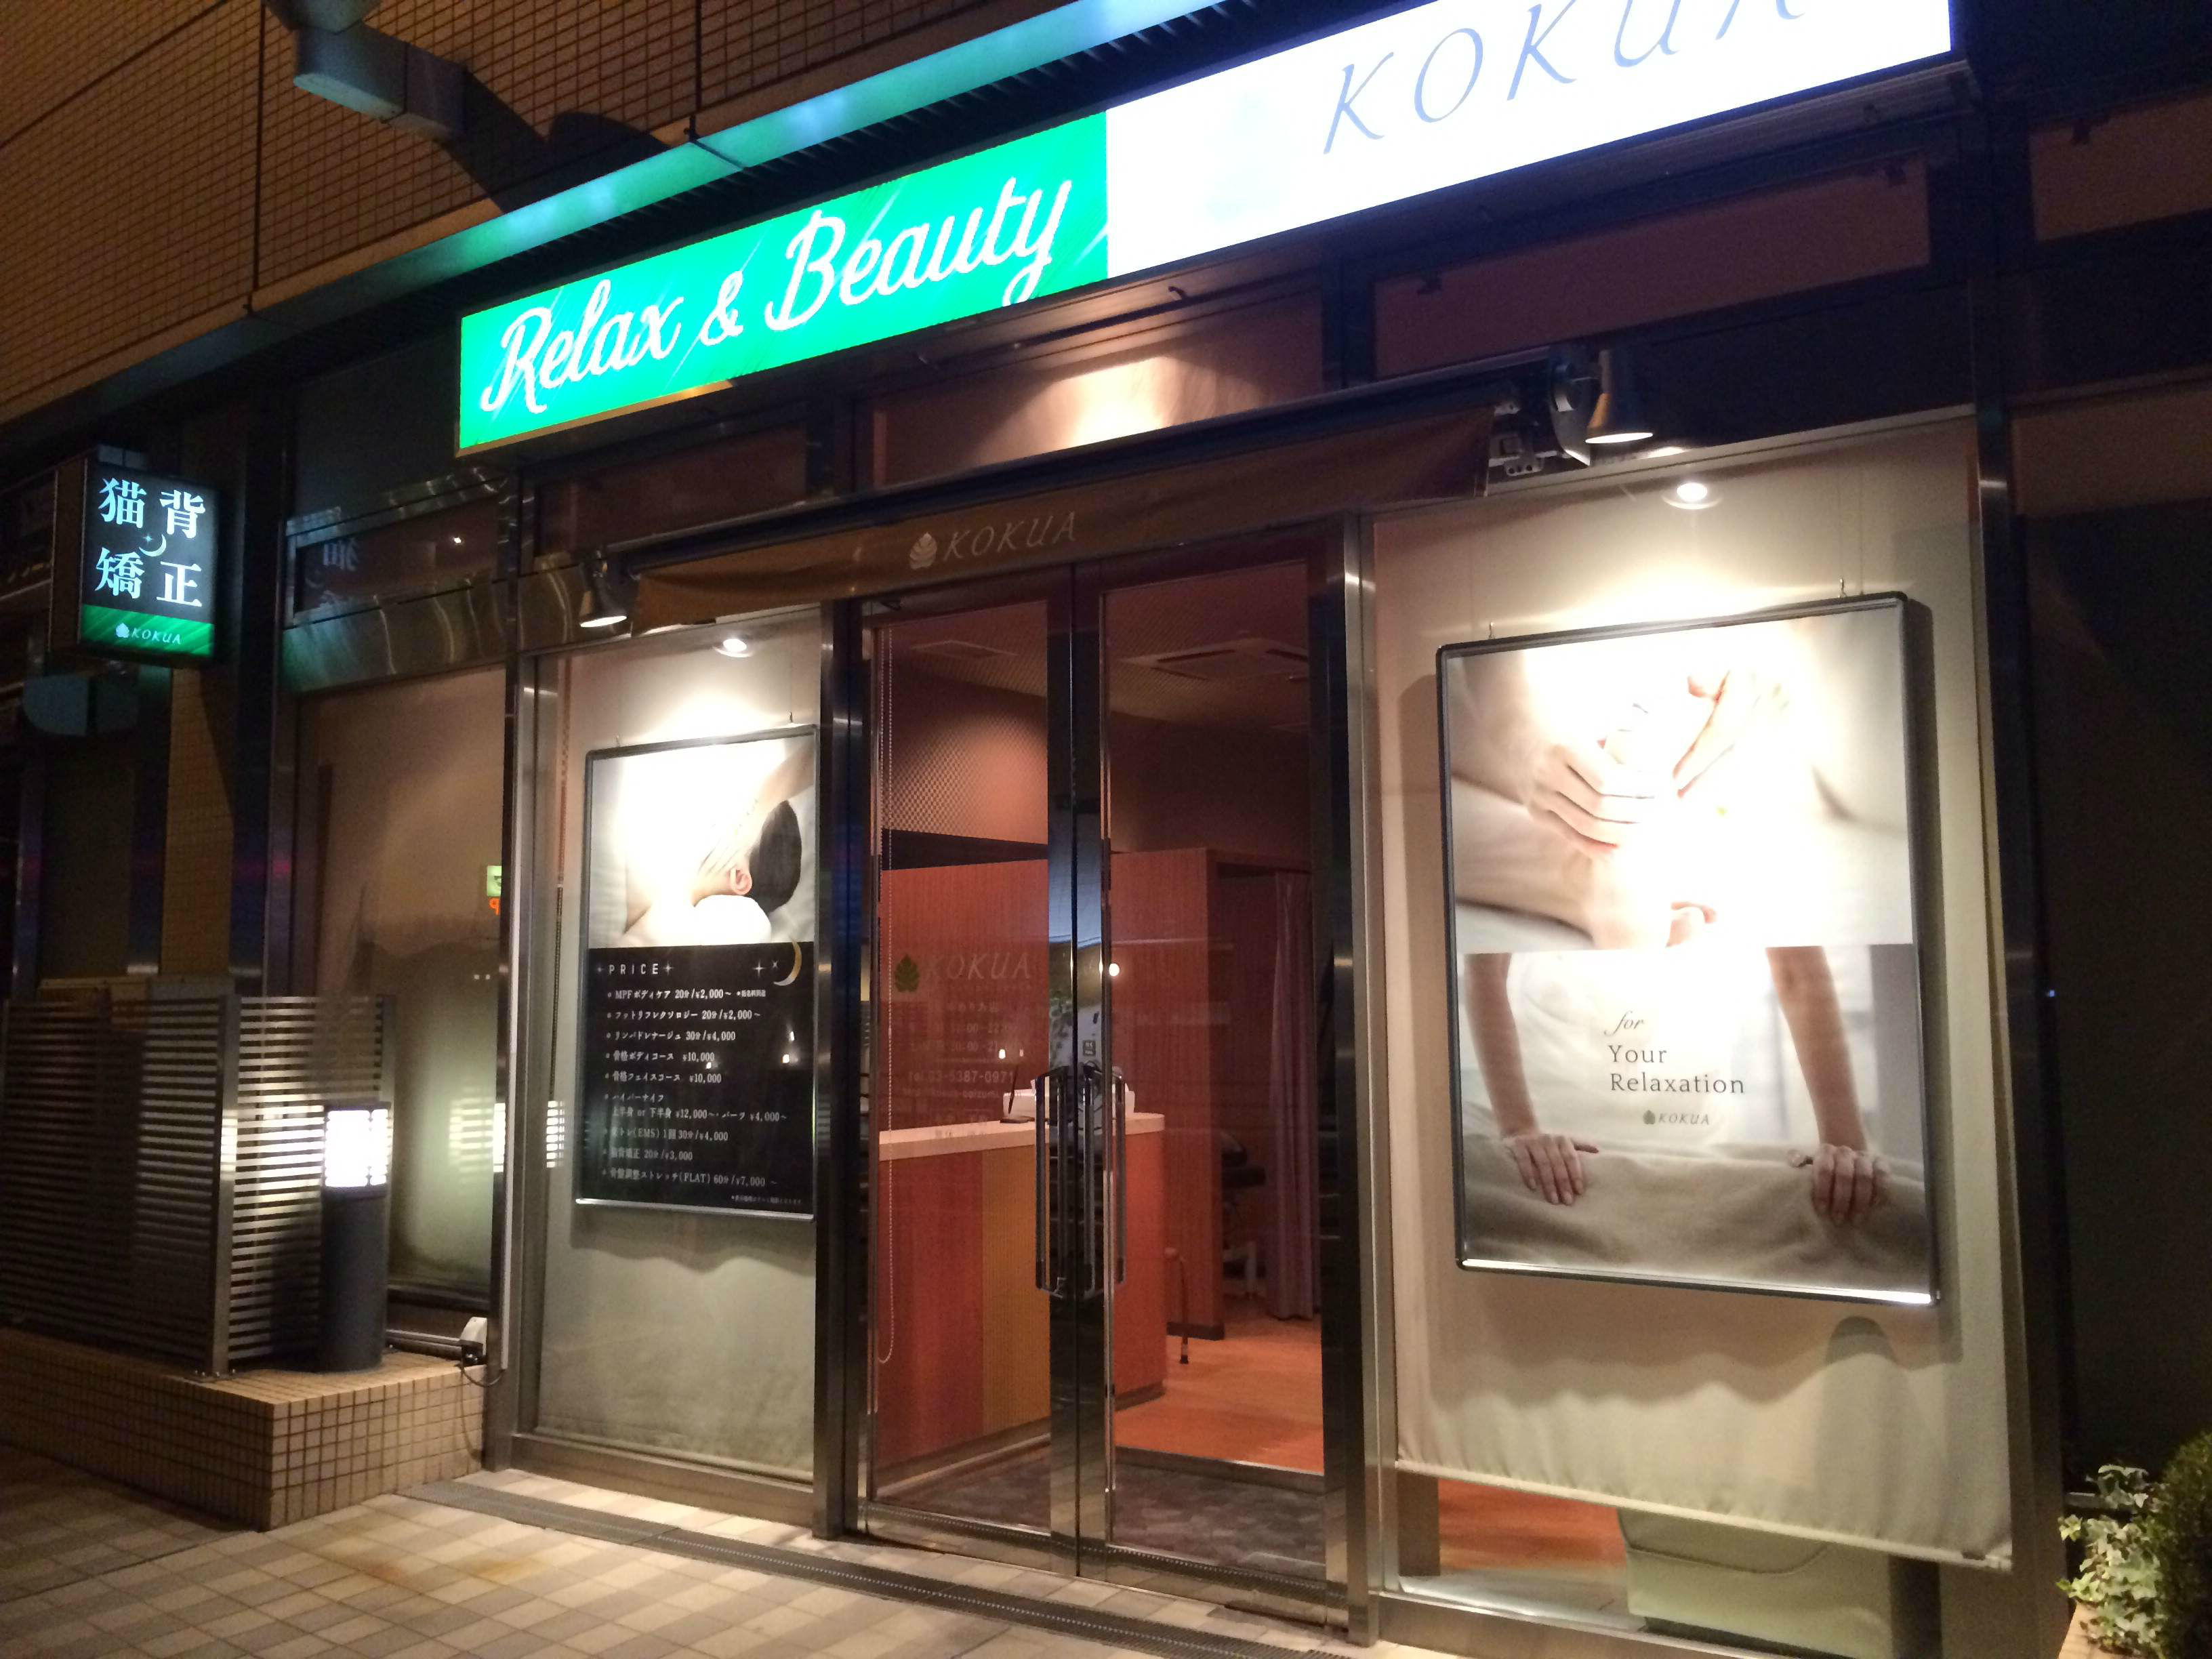 relaxation space KOKUA 大泉ゆめりあ店のアイキャッチ画像